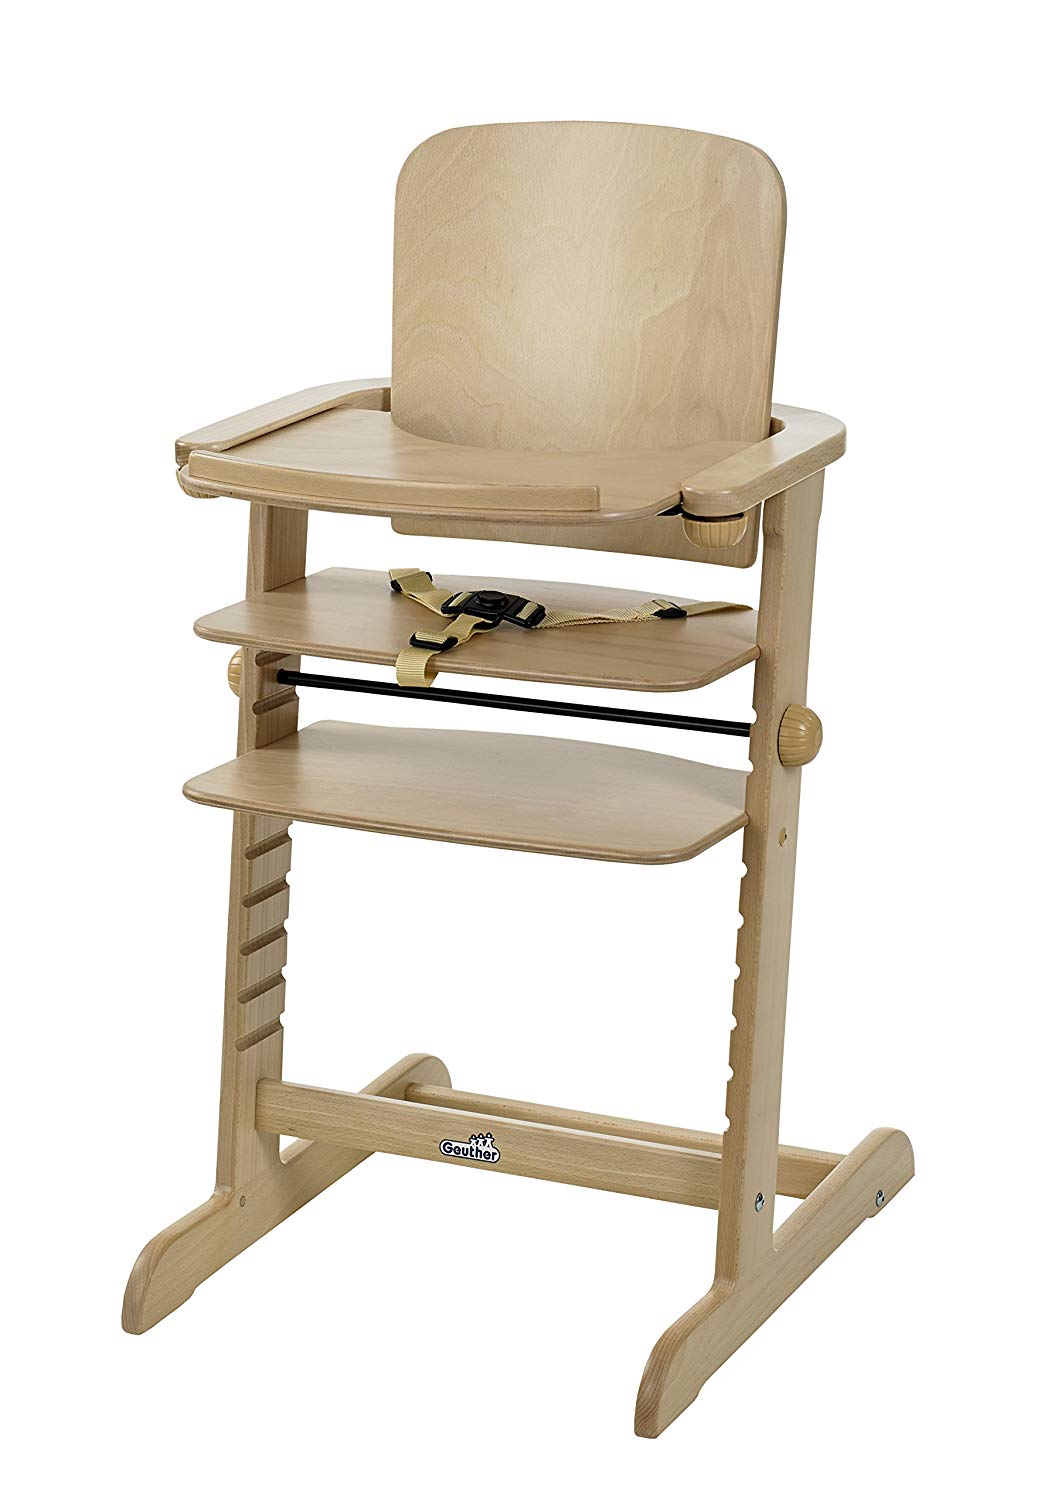 Geuther 2335 - High Chair Family